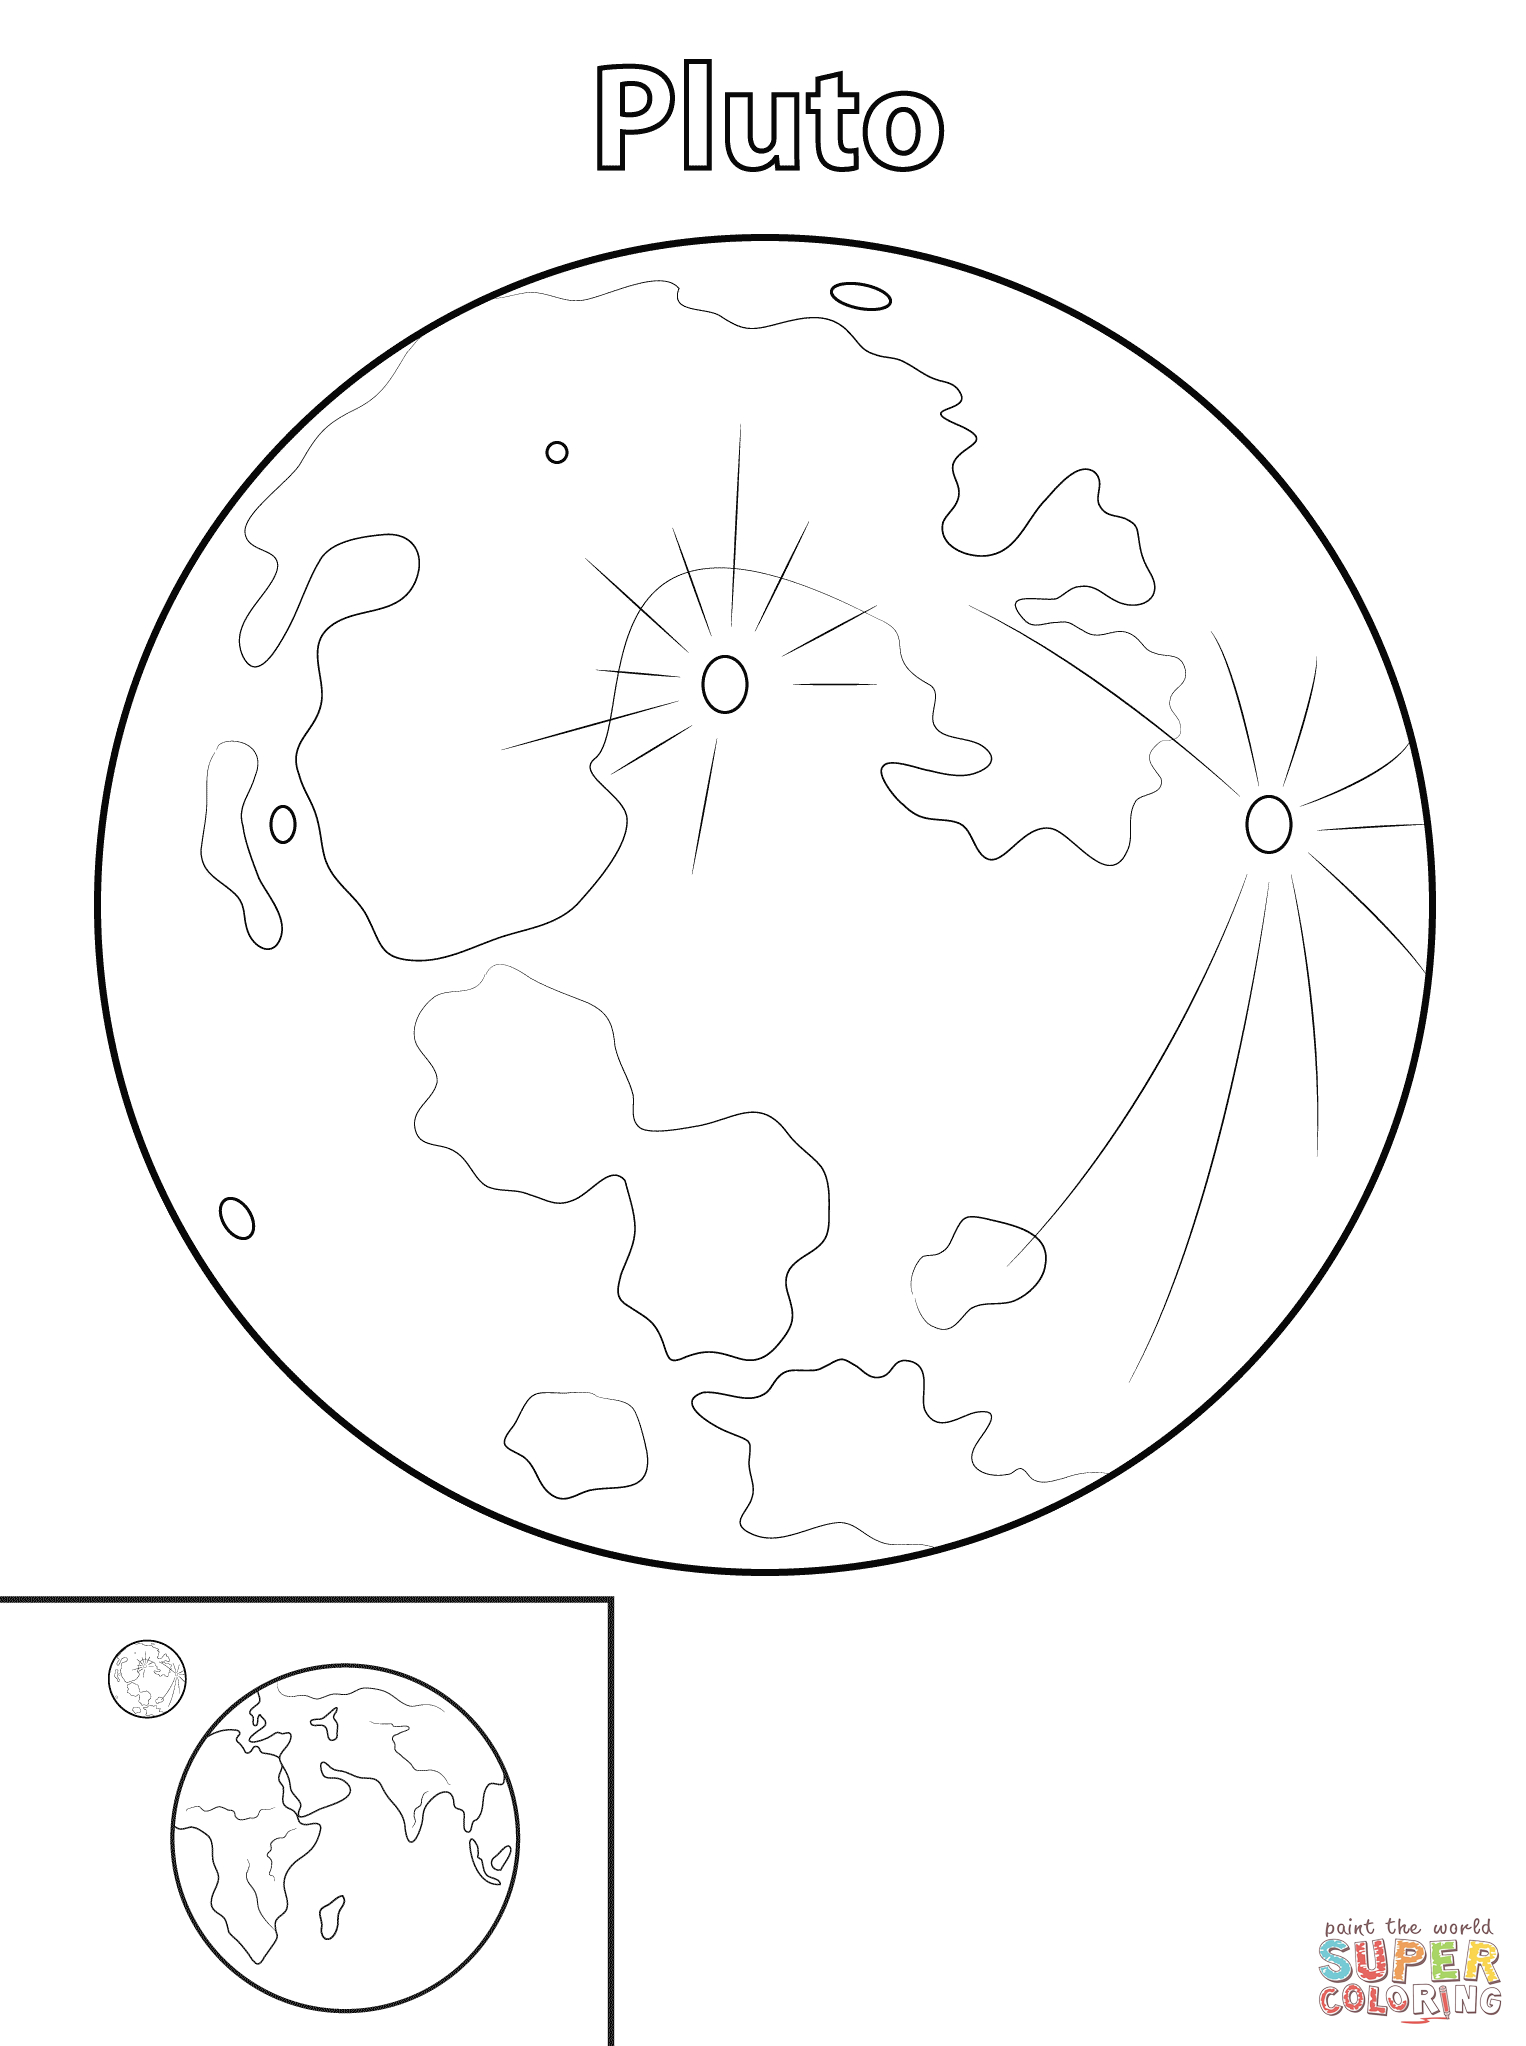 Pluto Coloring Pages Pluto Planet Coloring Page Free Printable Coloring Pages Clip